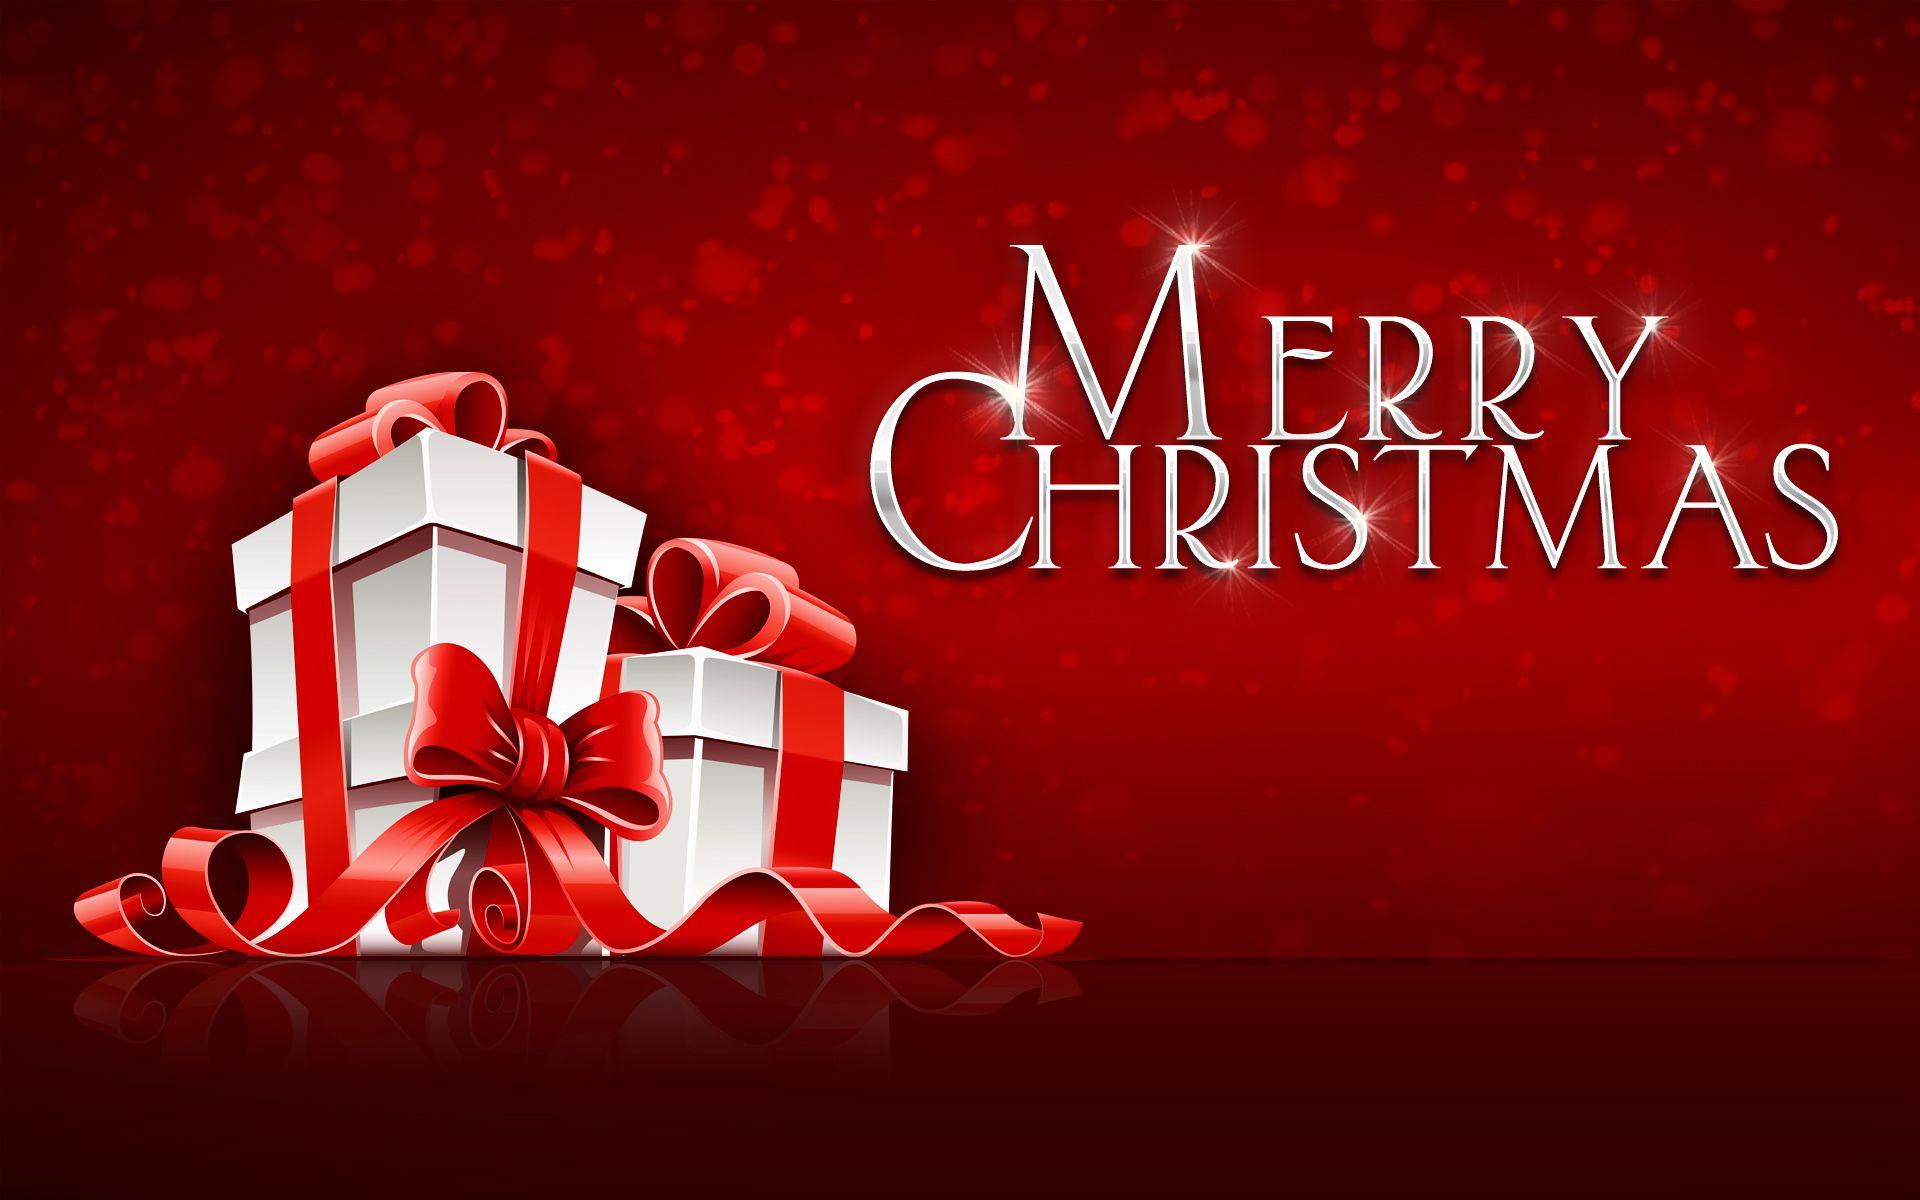 Merry Christmas wallpaper & Picture. Christmas Wishes Greetings